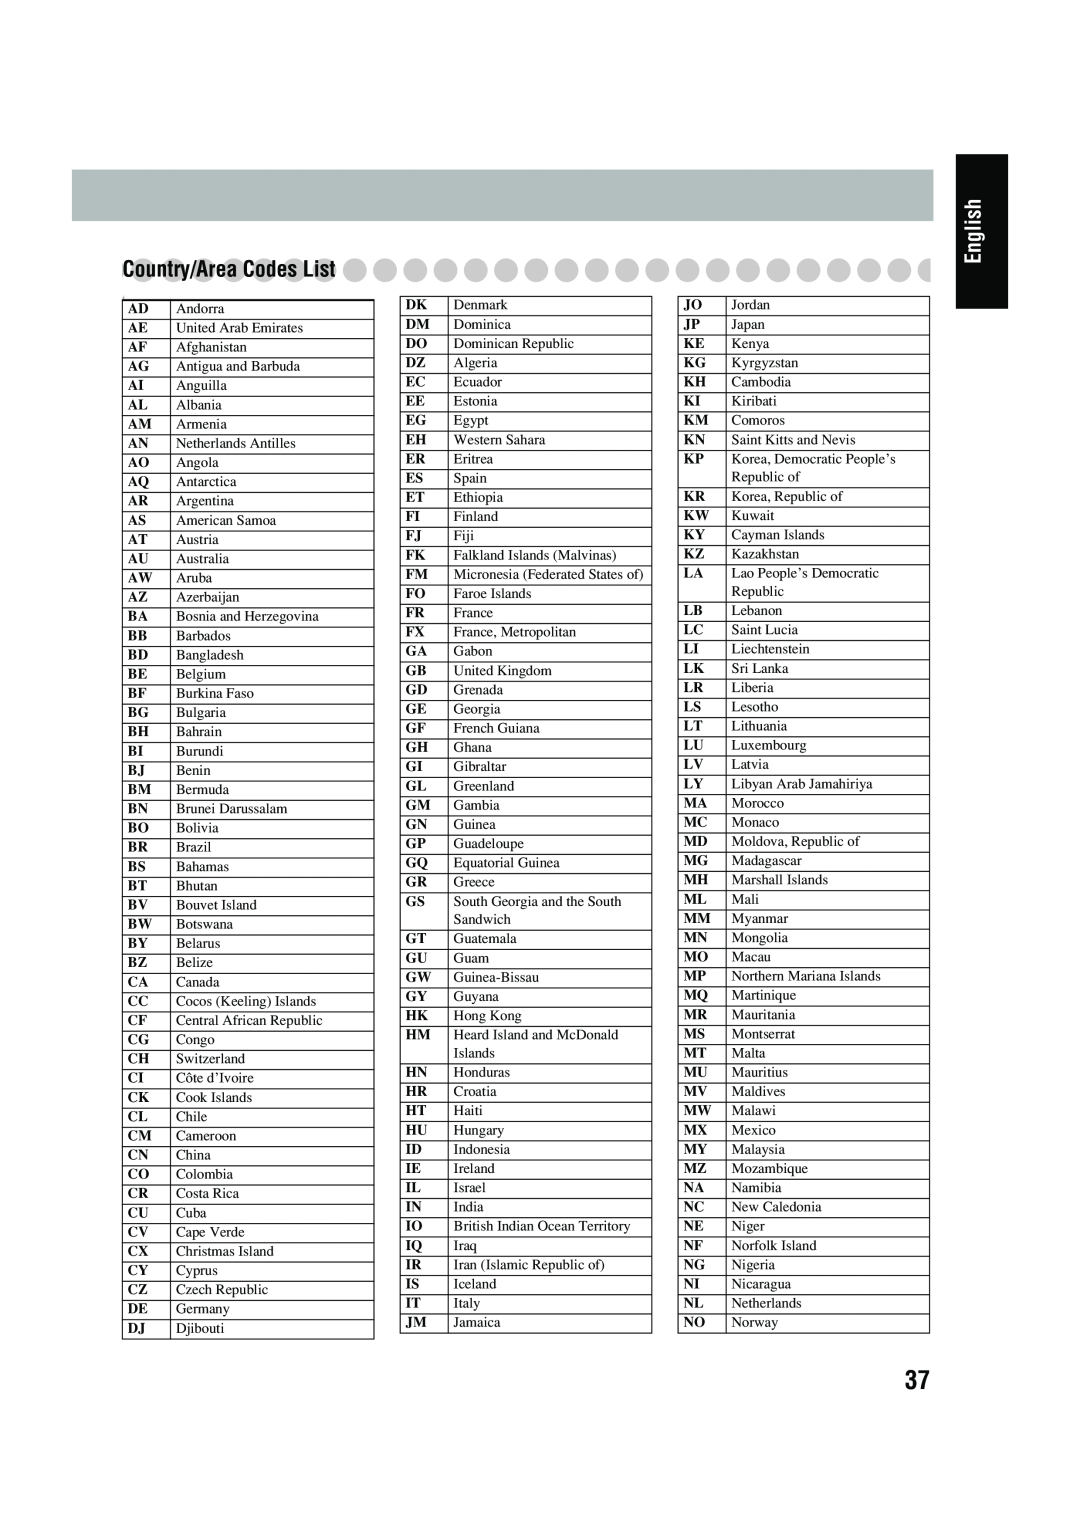 JVC FS-P550 manual Country/Area Codes List, English 